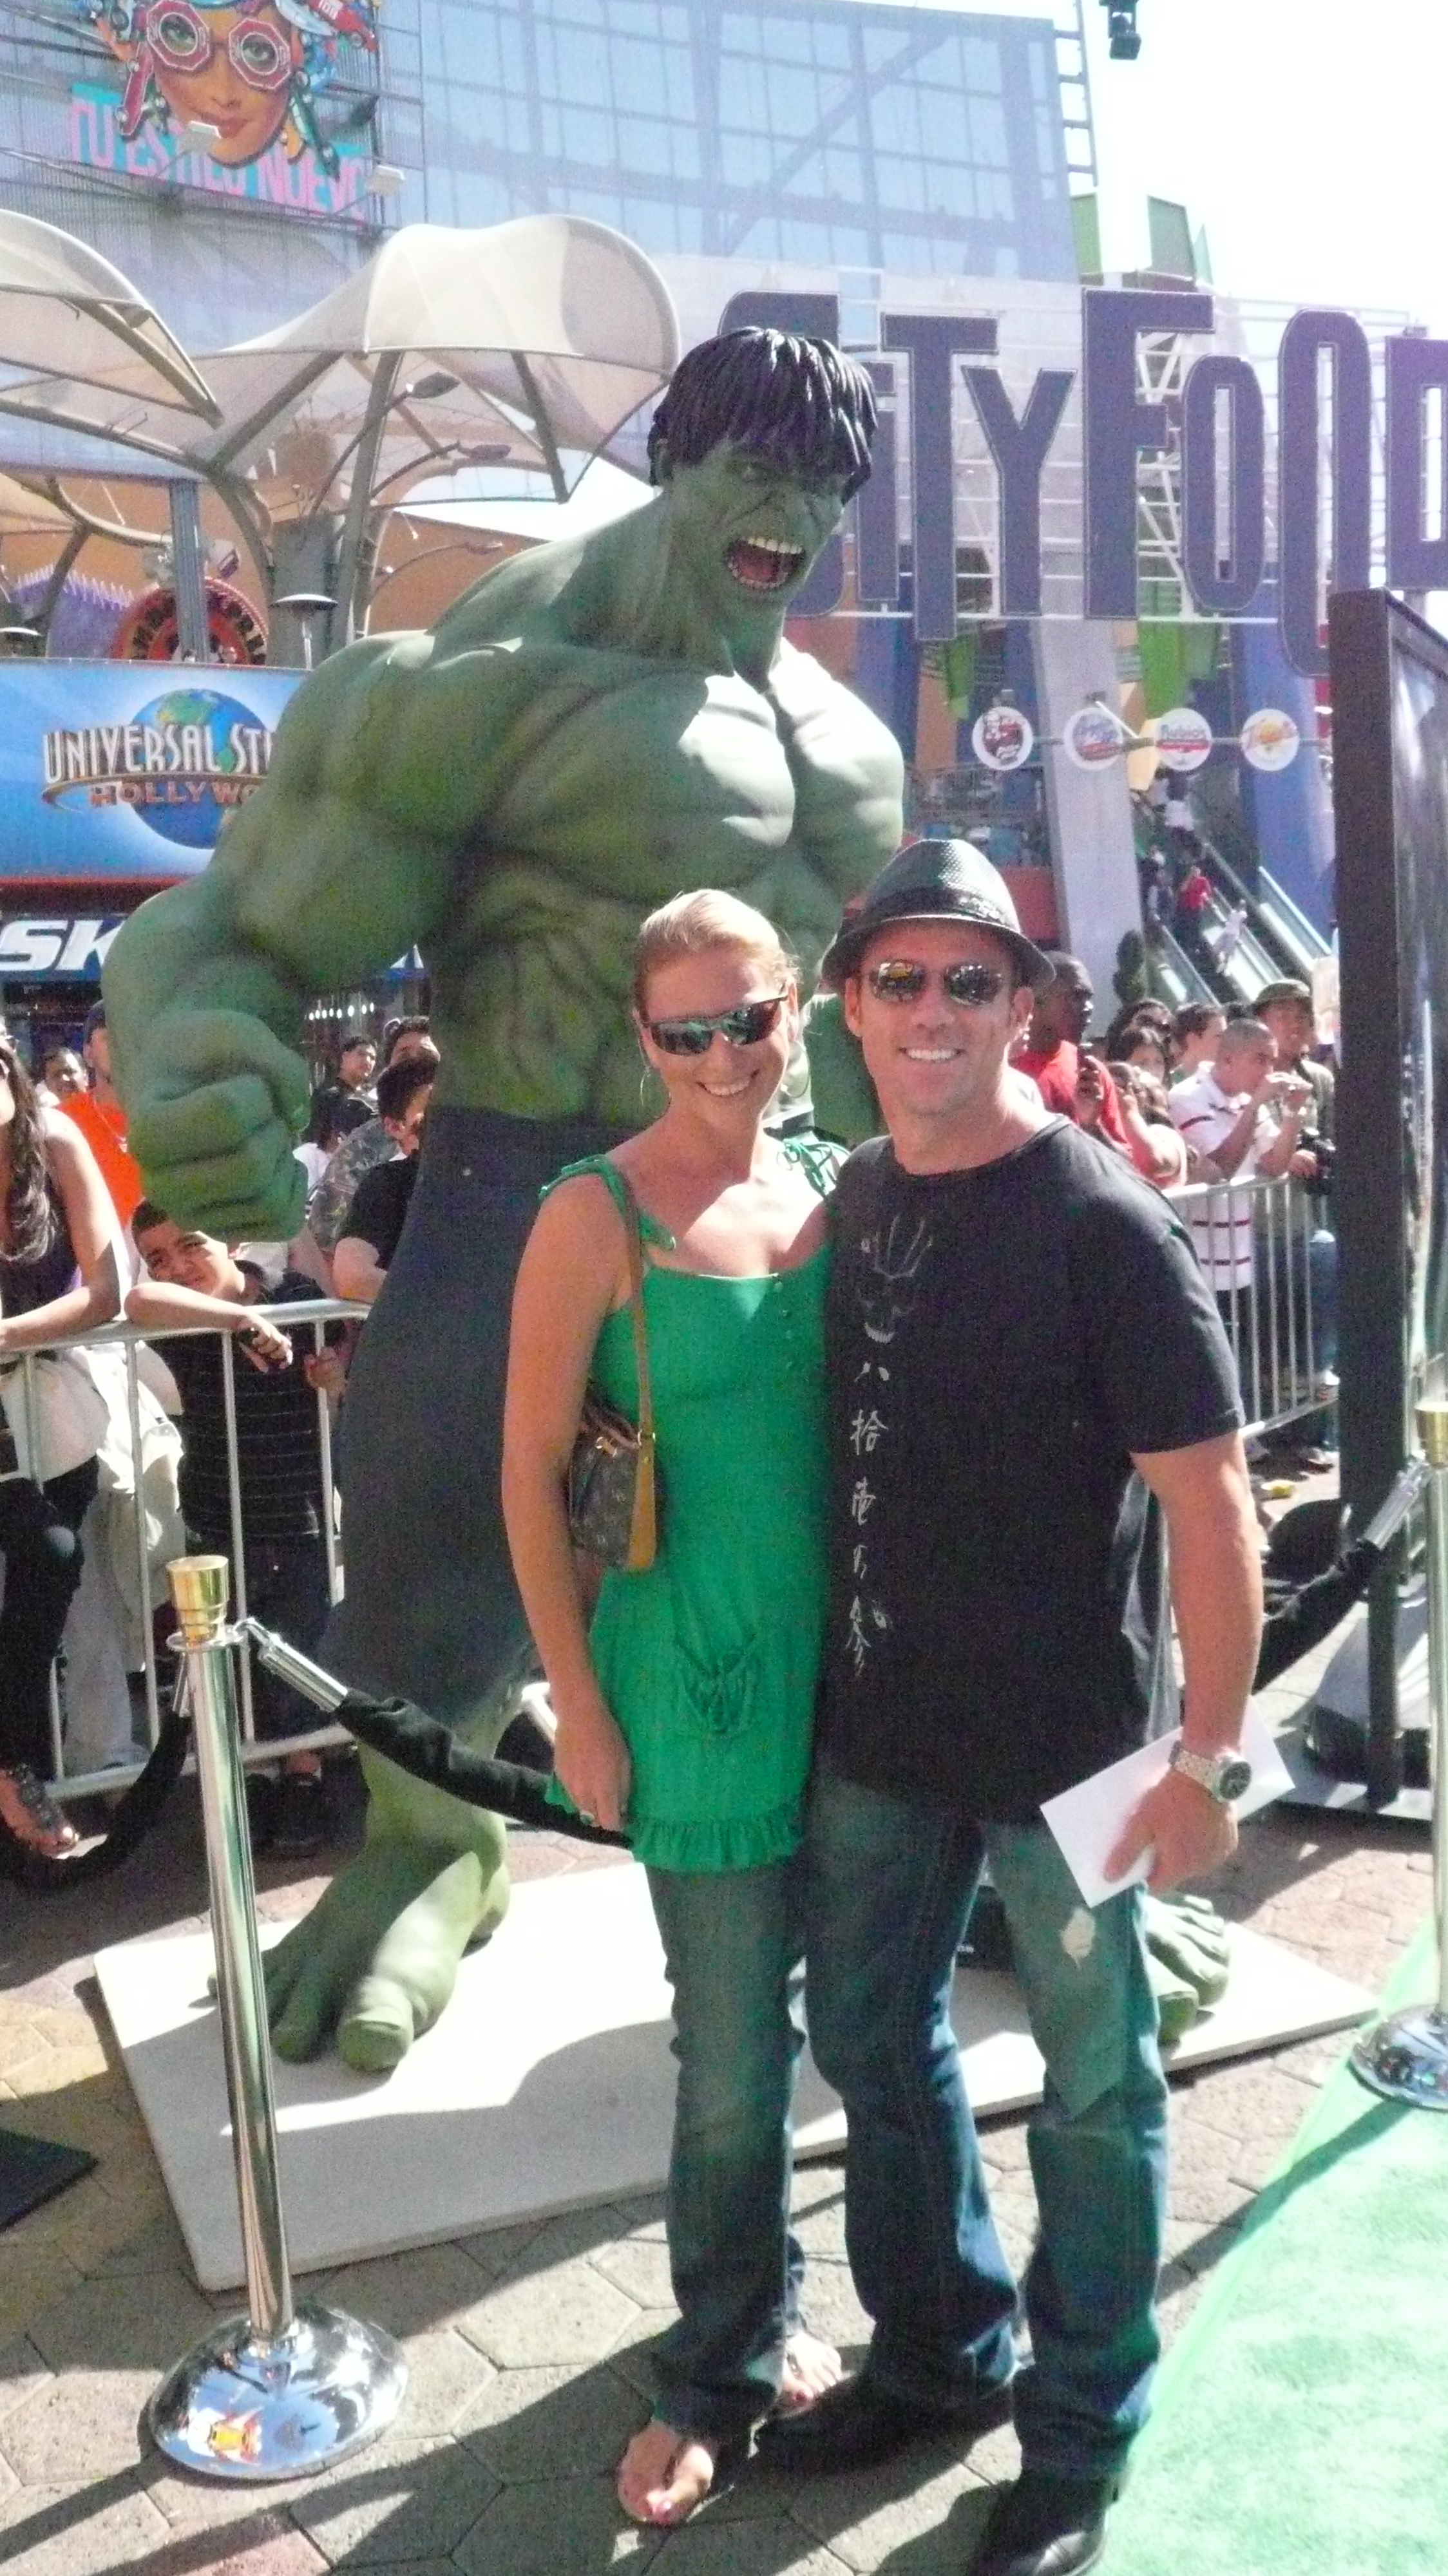 Terry Notary and his wife Rhonda Notary at the Hollywood Primer of 'The Incredible Hulk'.